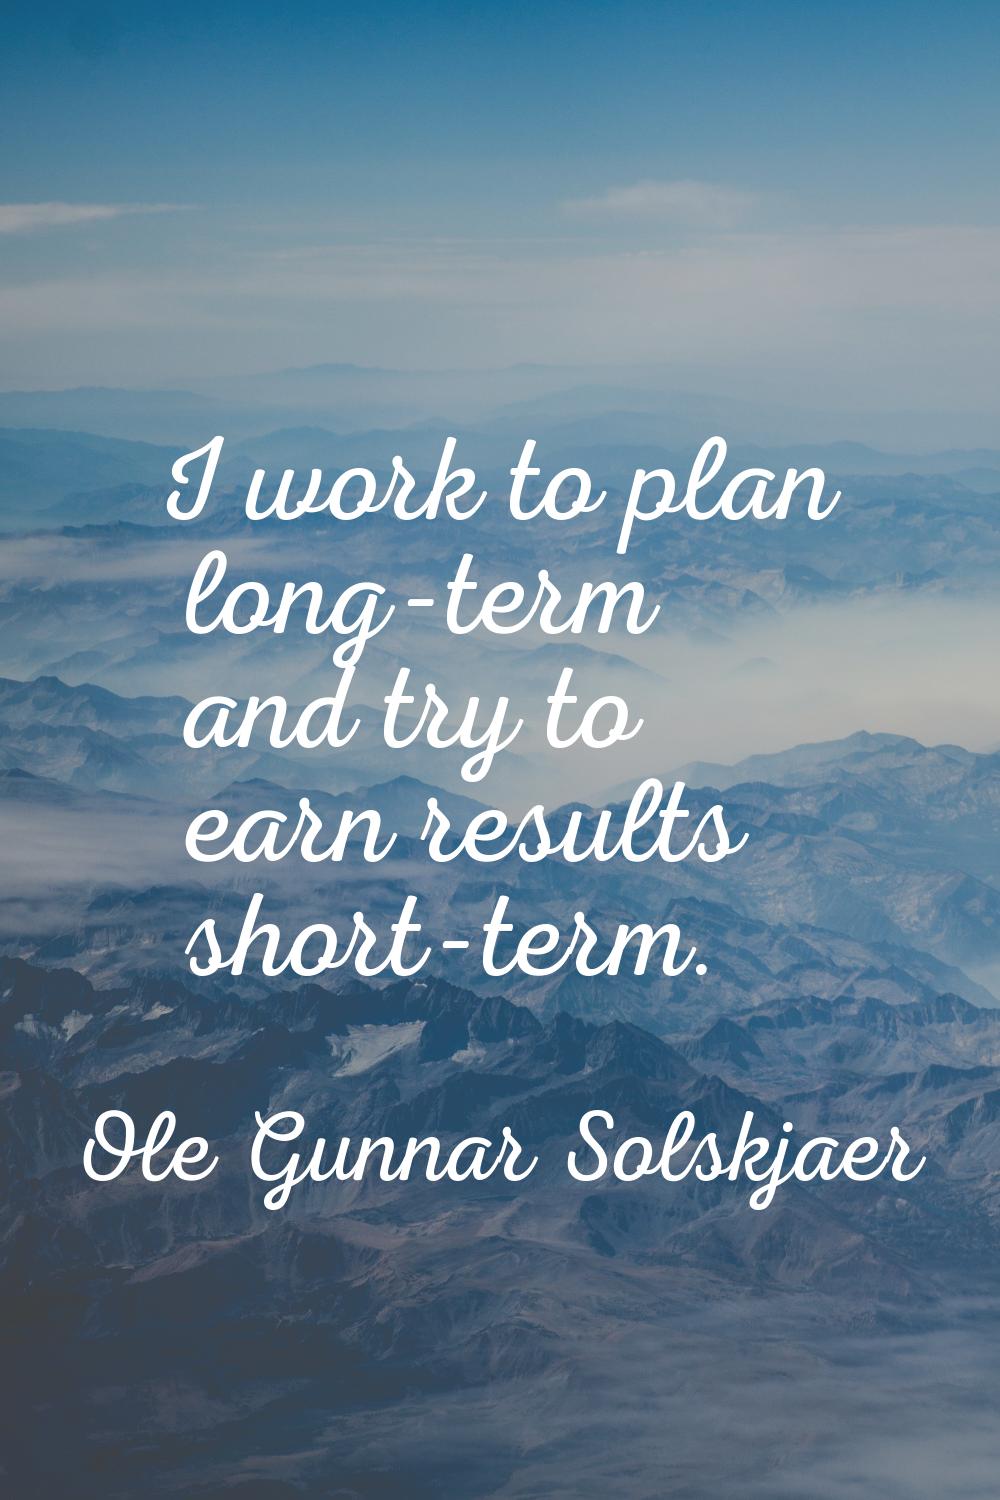 I work to plan long-term and try to earn results short-term.